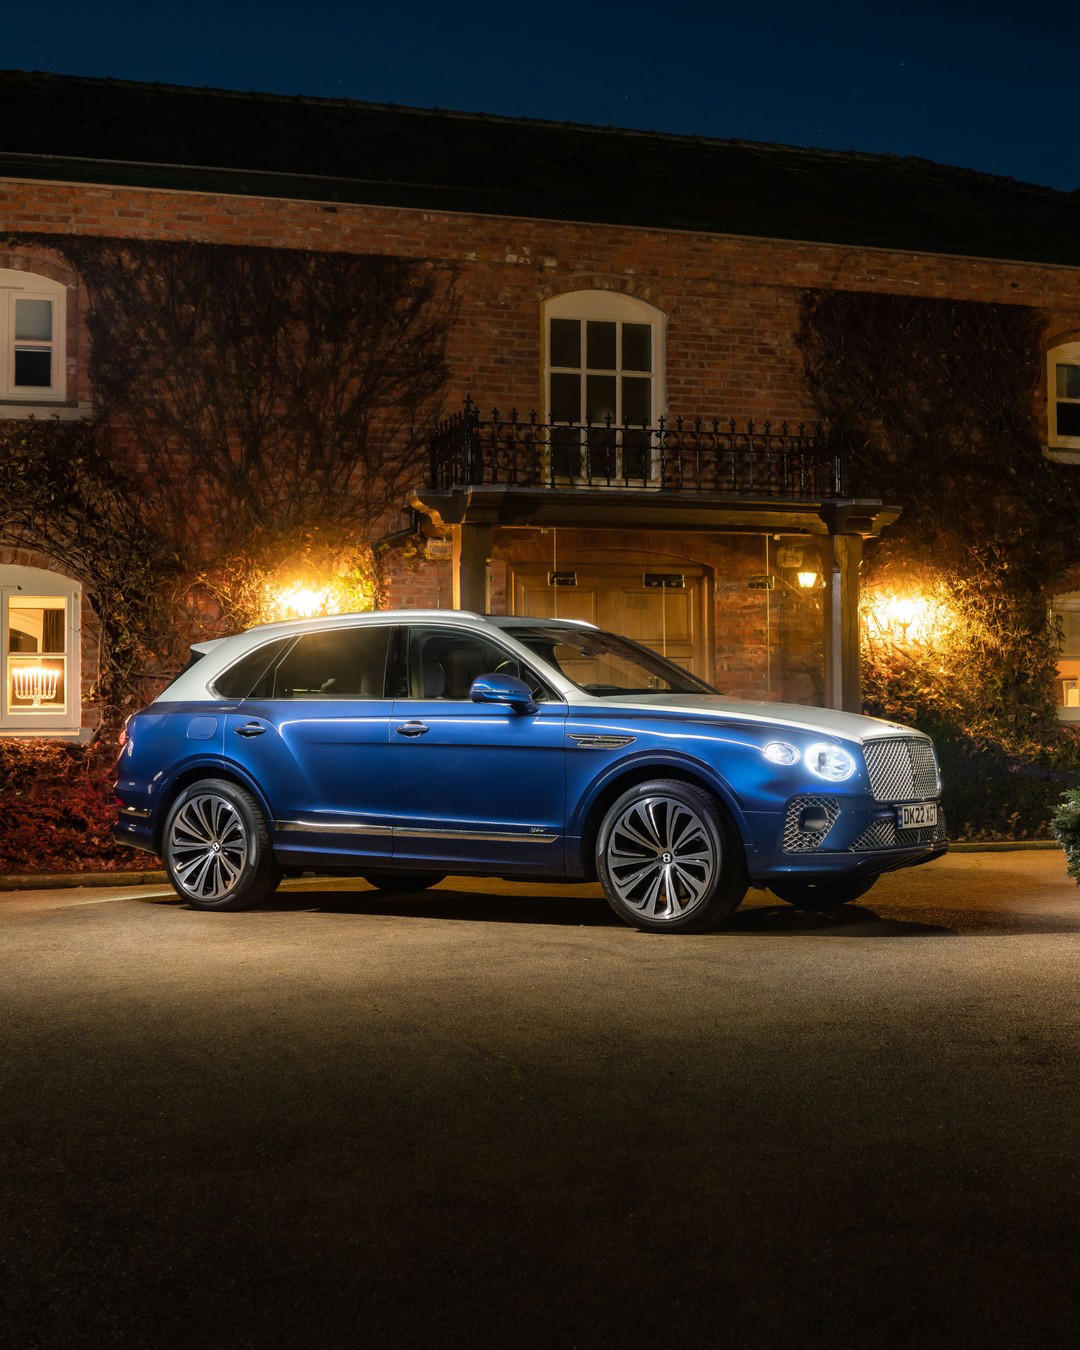 image  1 Bentley Motors - Everyone in the #Bentley family wishes you a bright and meaningful Hanukkah